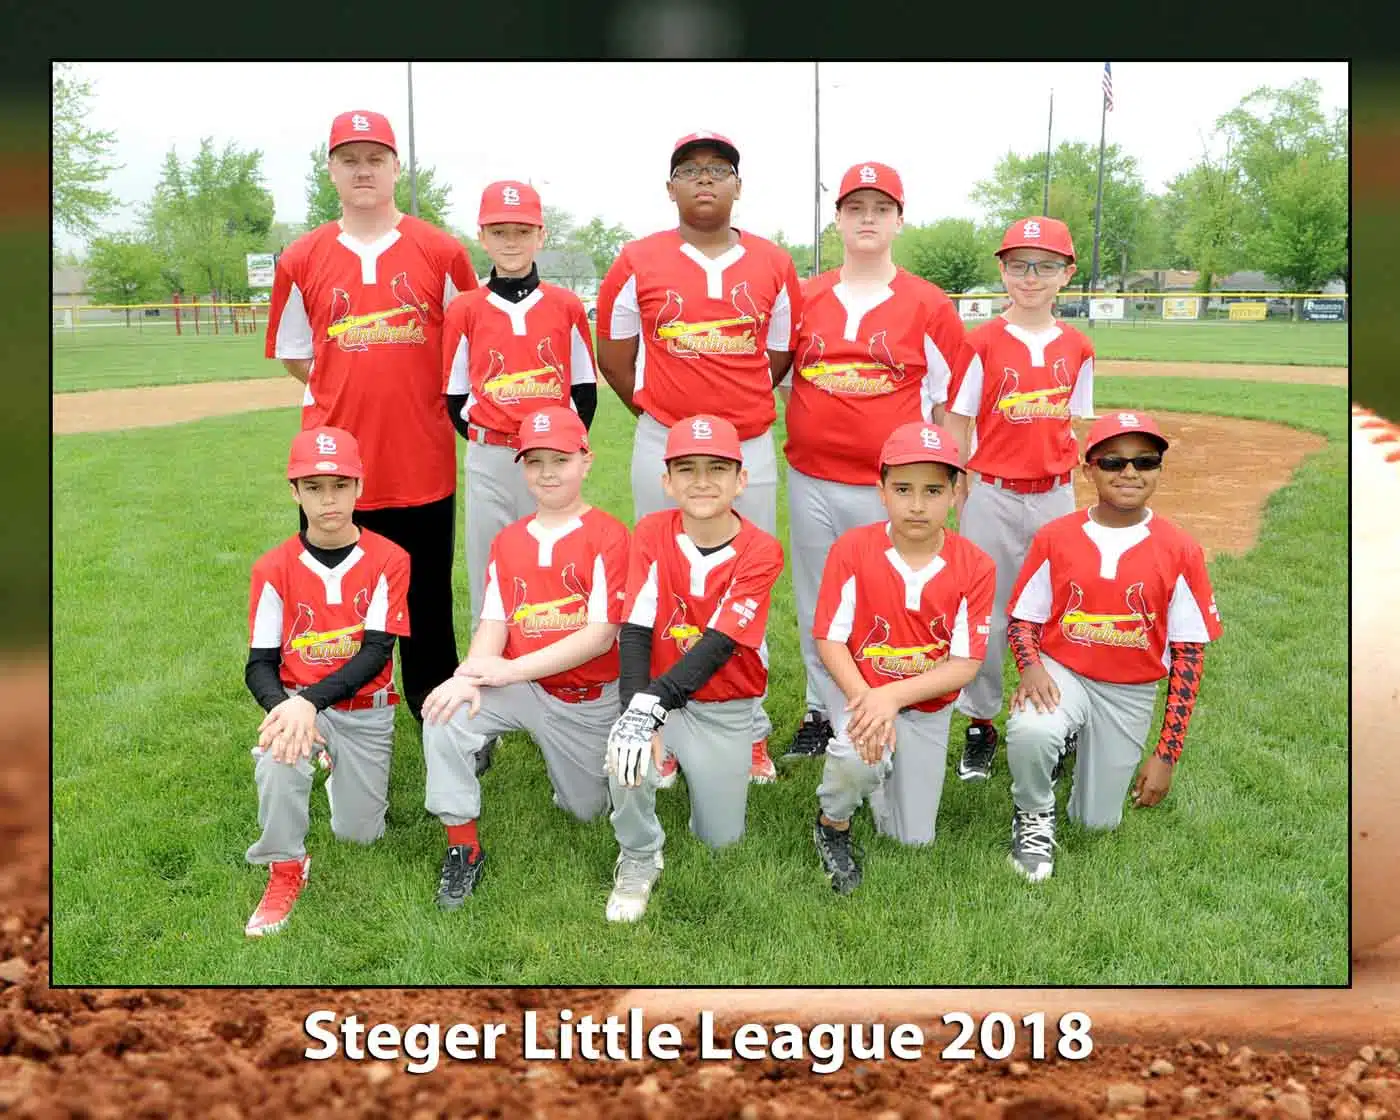 Steger Little league group in red uniforms pose